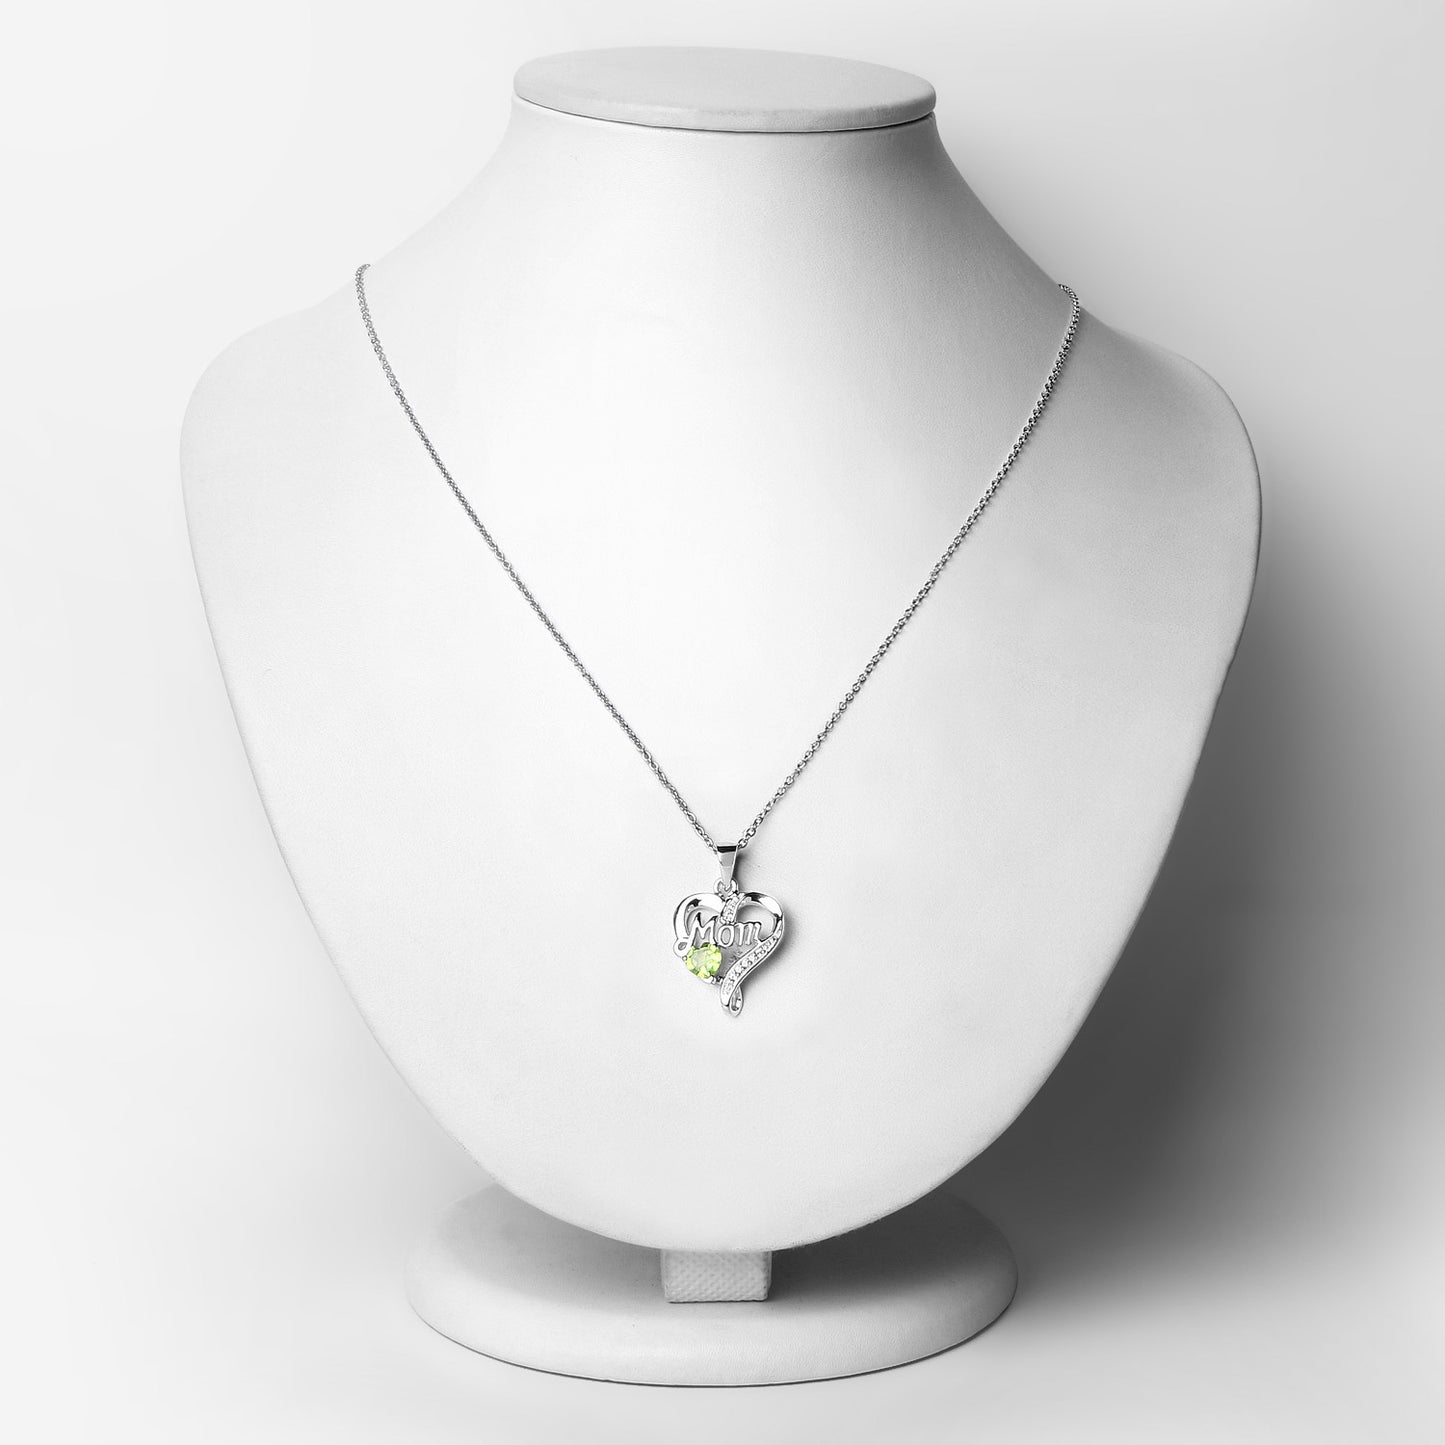 Sterling Silver Peridot and White Topaz Mom Heart Pendant with Chain fine